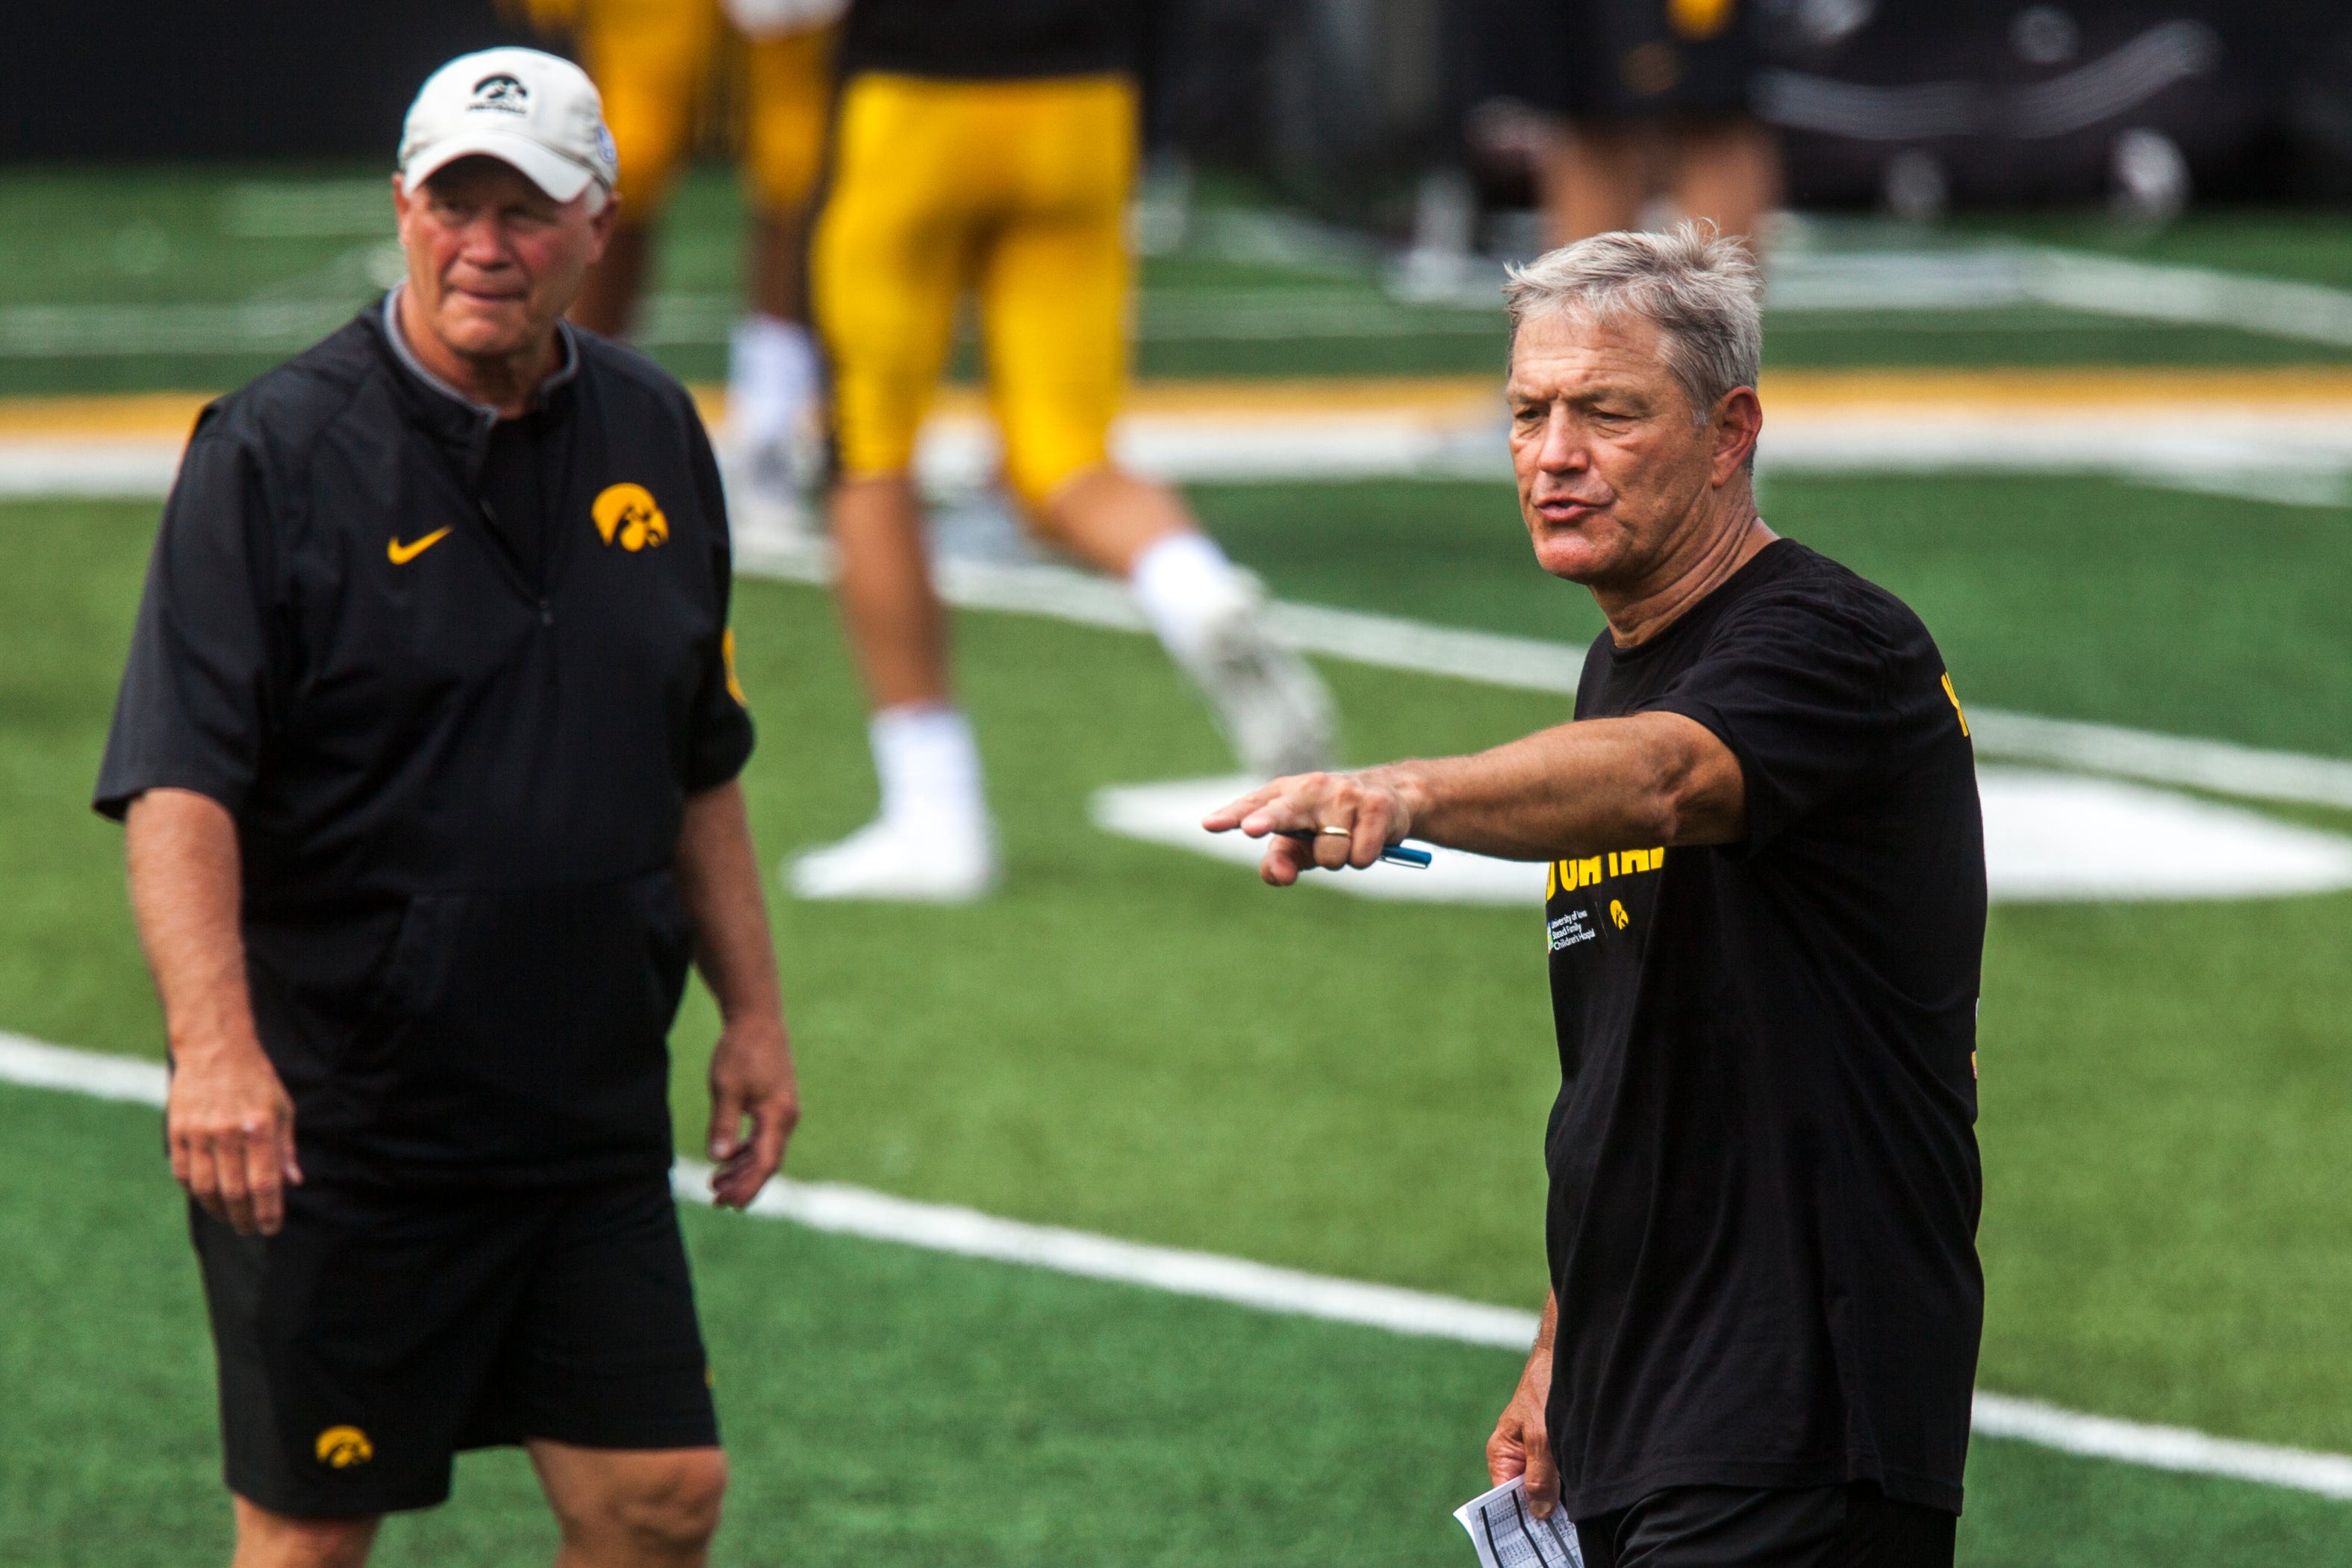 Iowa football head coach Kirk Ferentz (right) gestures during a Kids Day practice on Saturday, Aug. 11, 2018, at Kinnick Stadium in Iowa City.